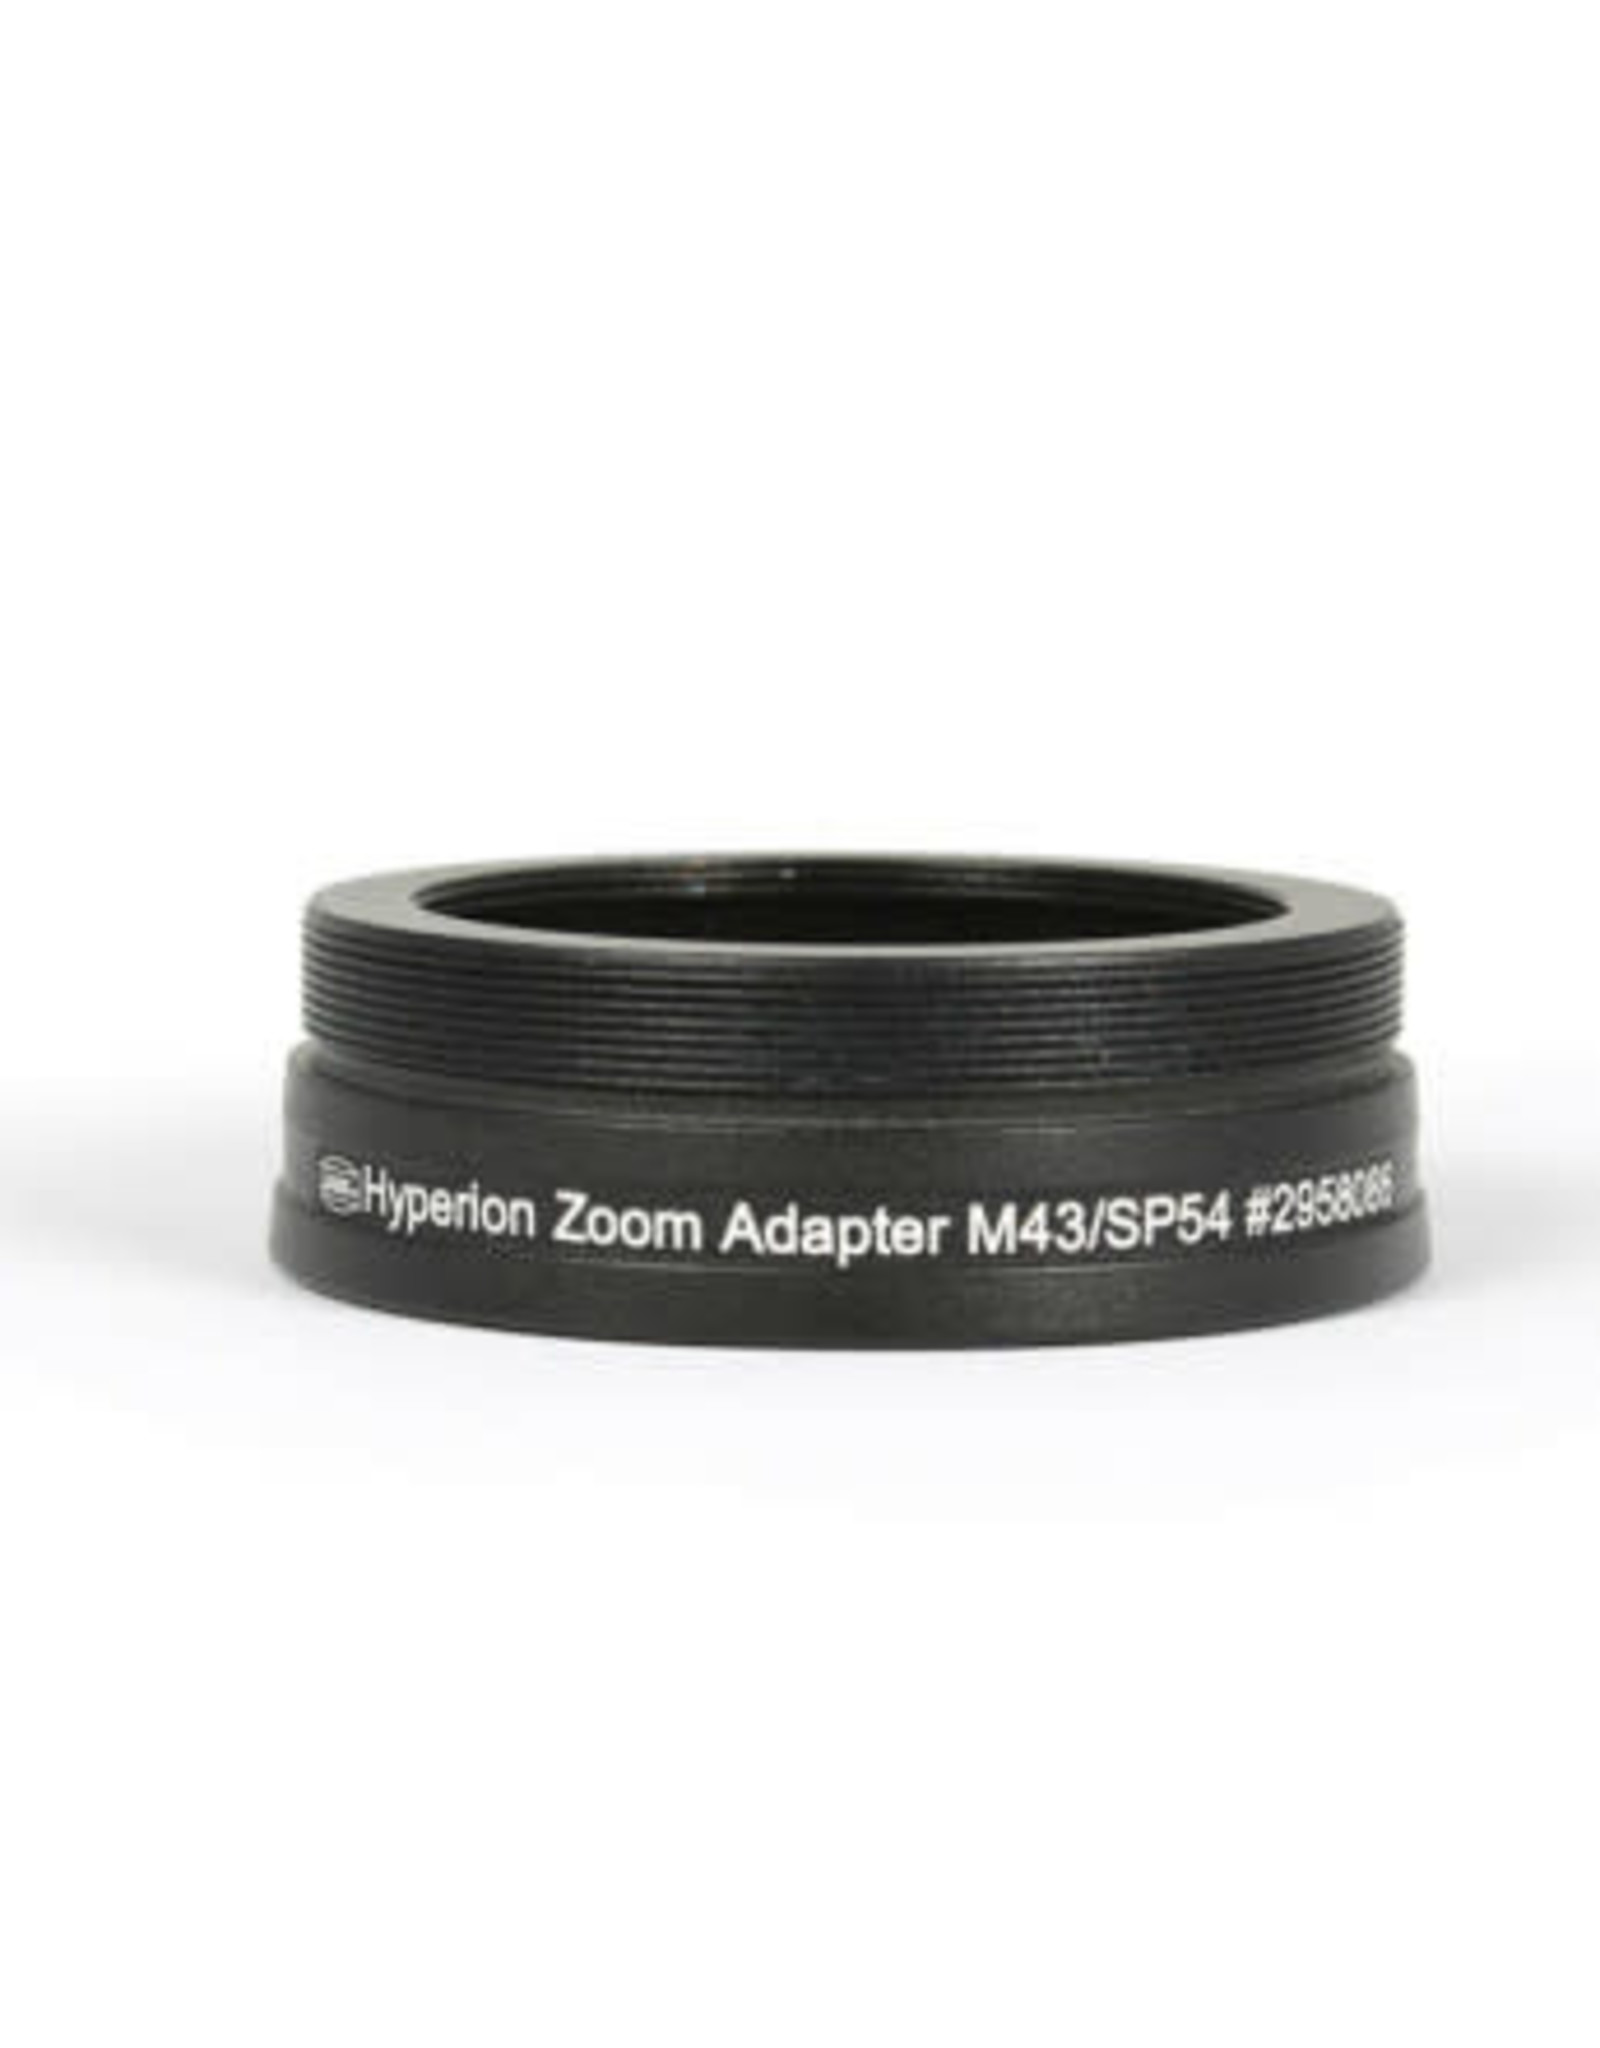 Baader Planetarium Baader DT Rings to Hyperion Zoom Eyepiece Adapter - M43/SP54